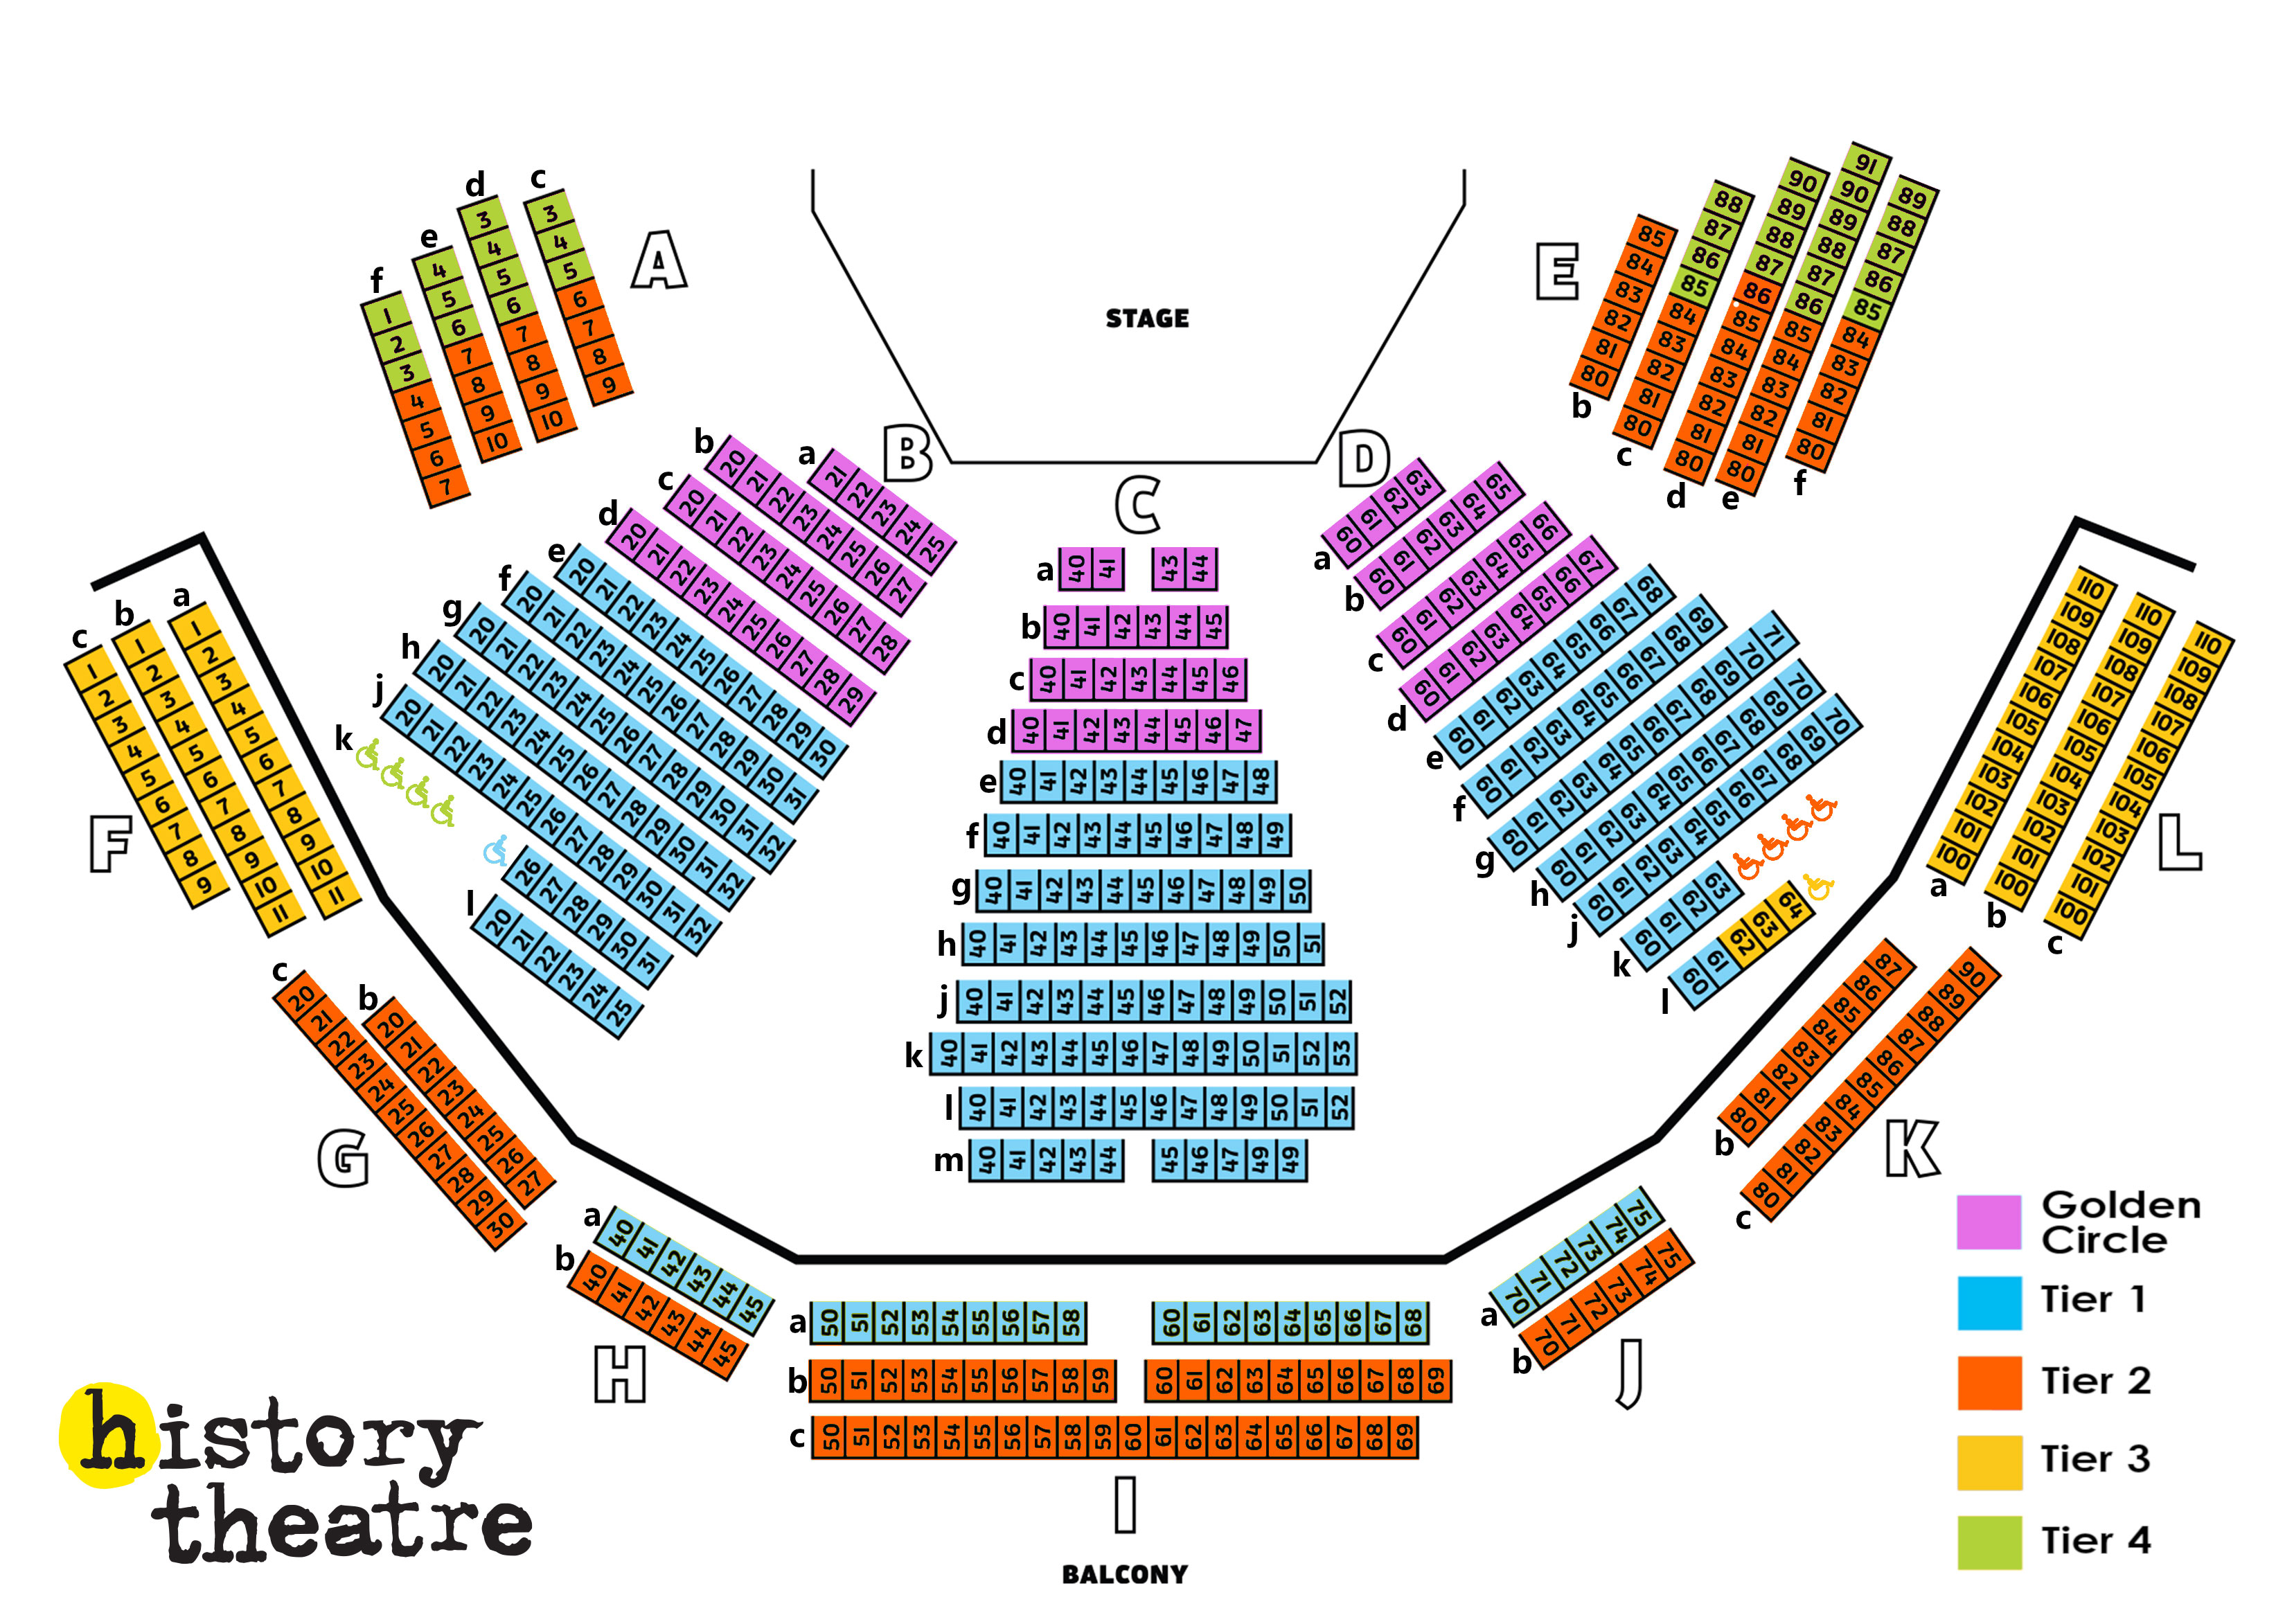 Goodyear theater seating chart